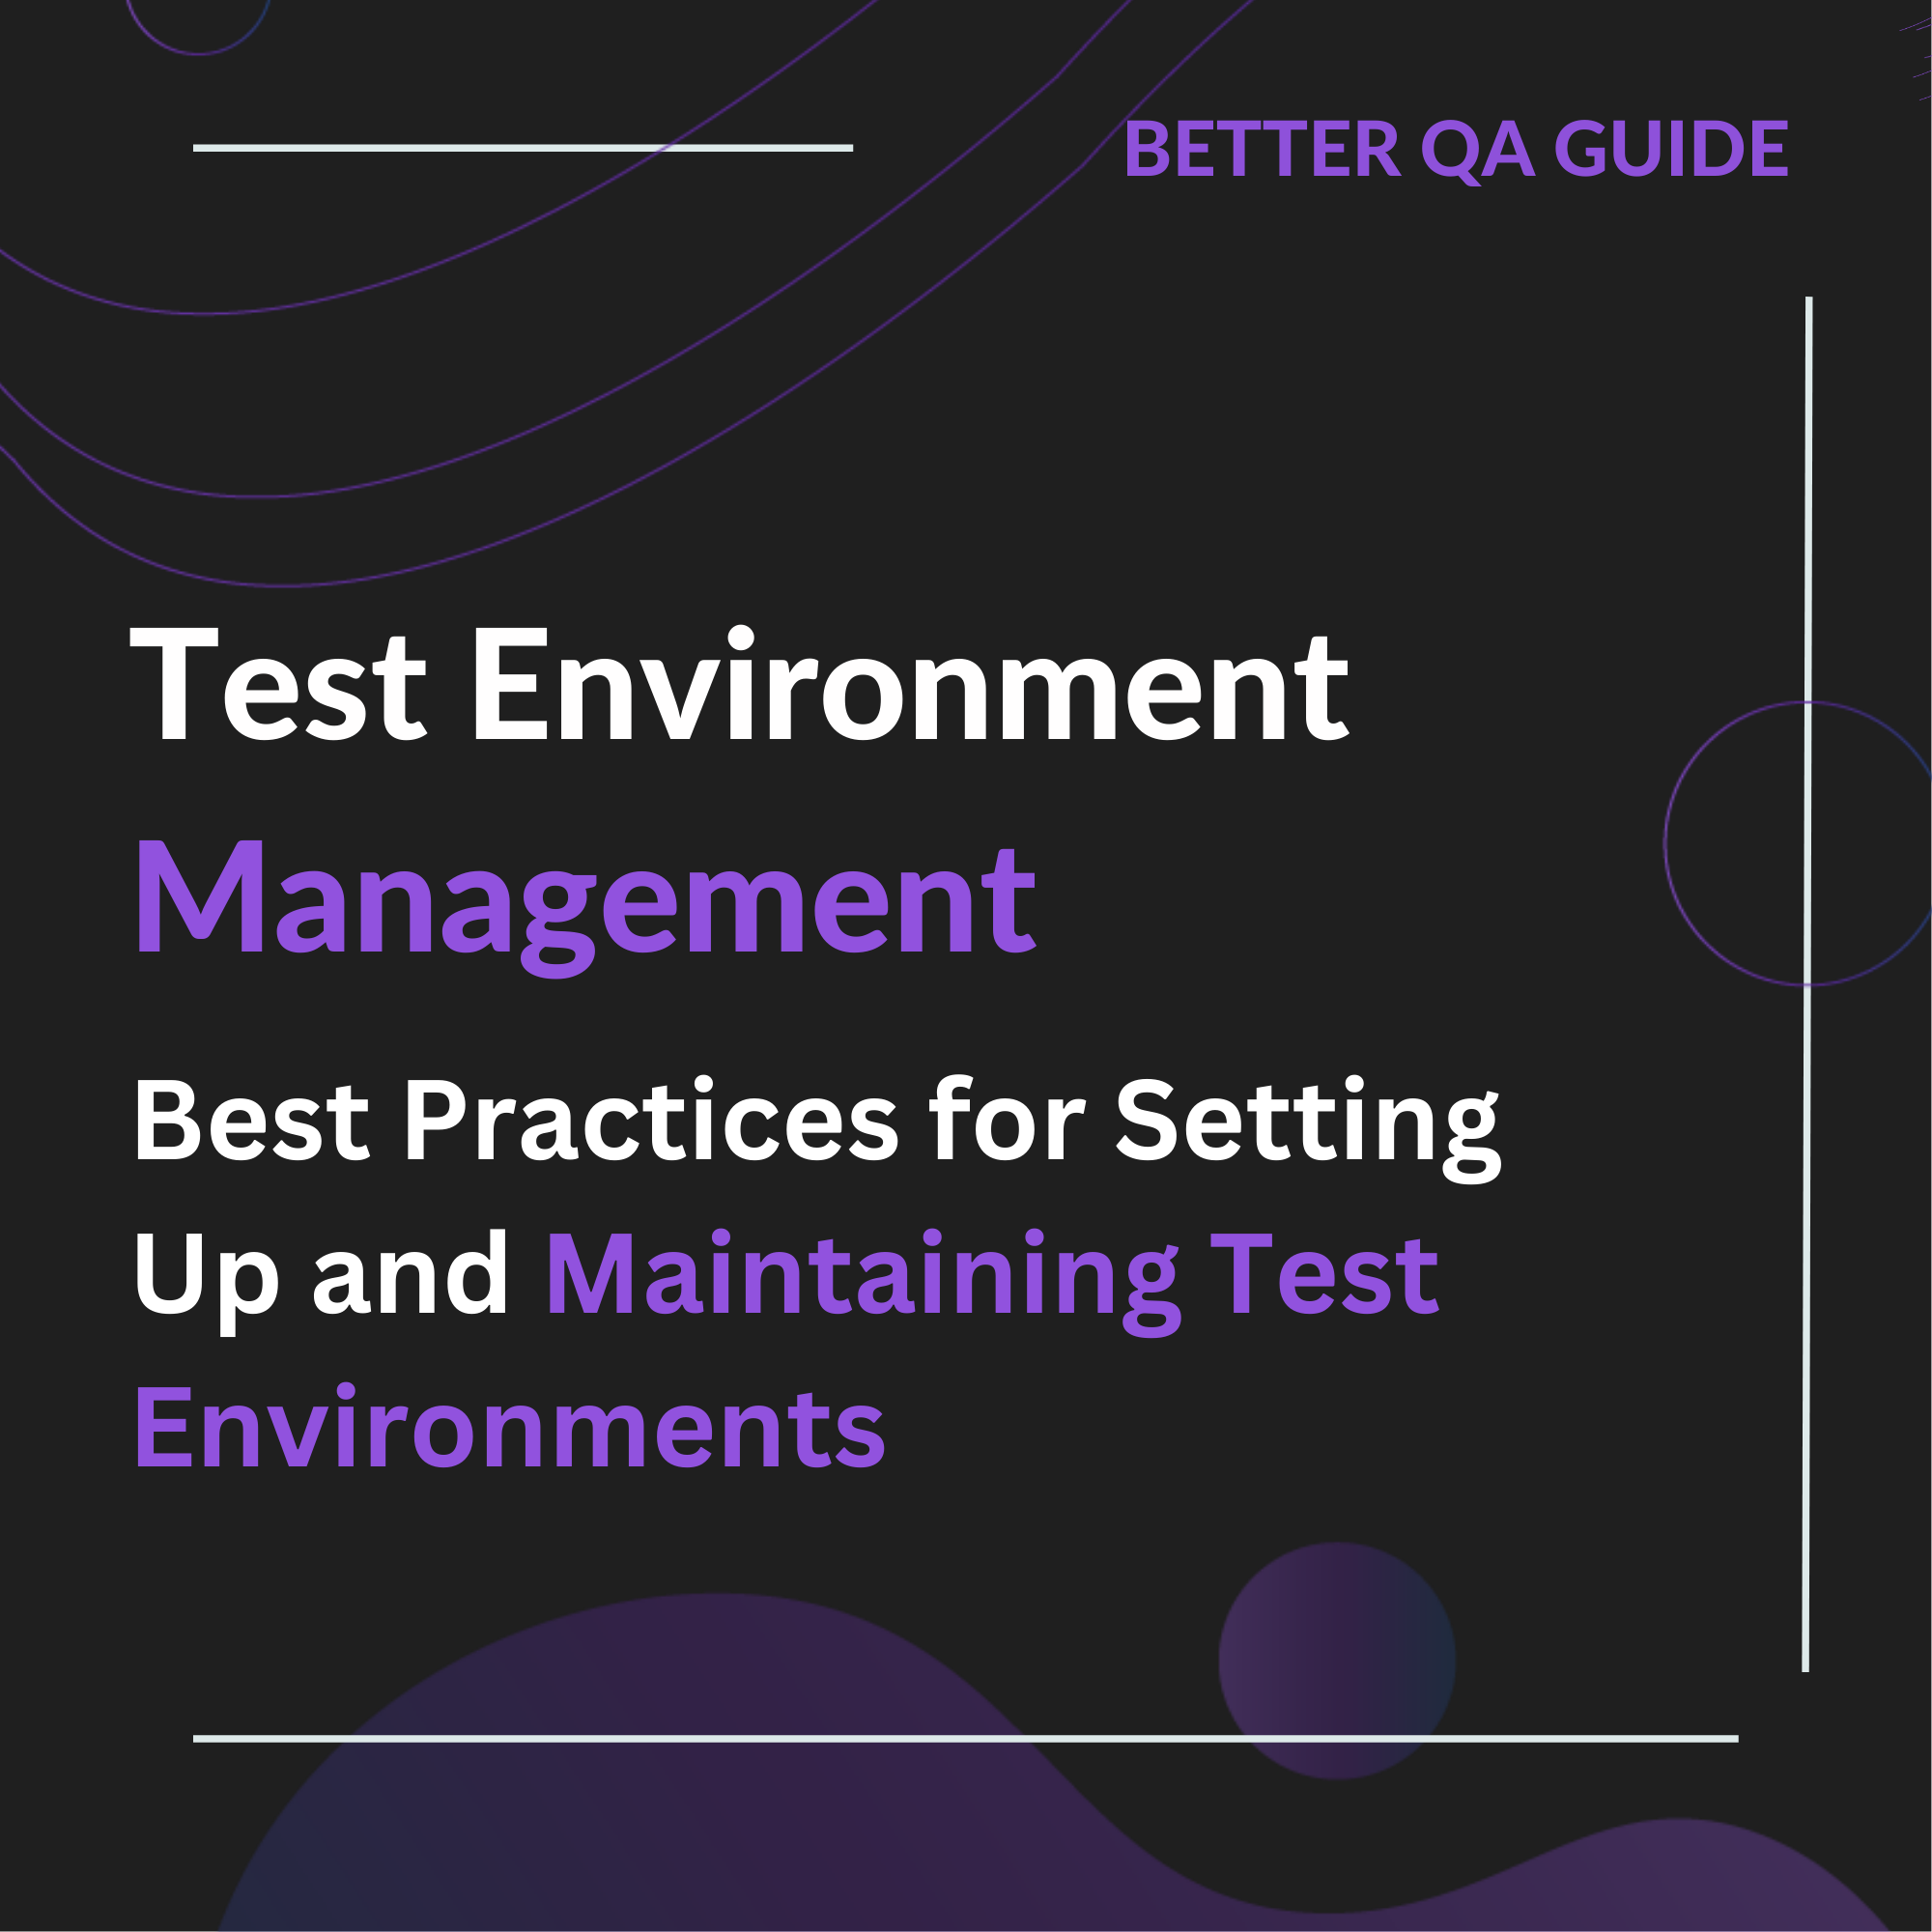 Test Environment Management Best practices for setting up and maintaining test environments